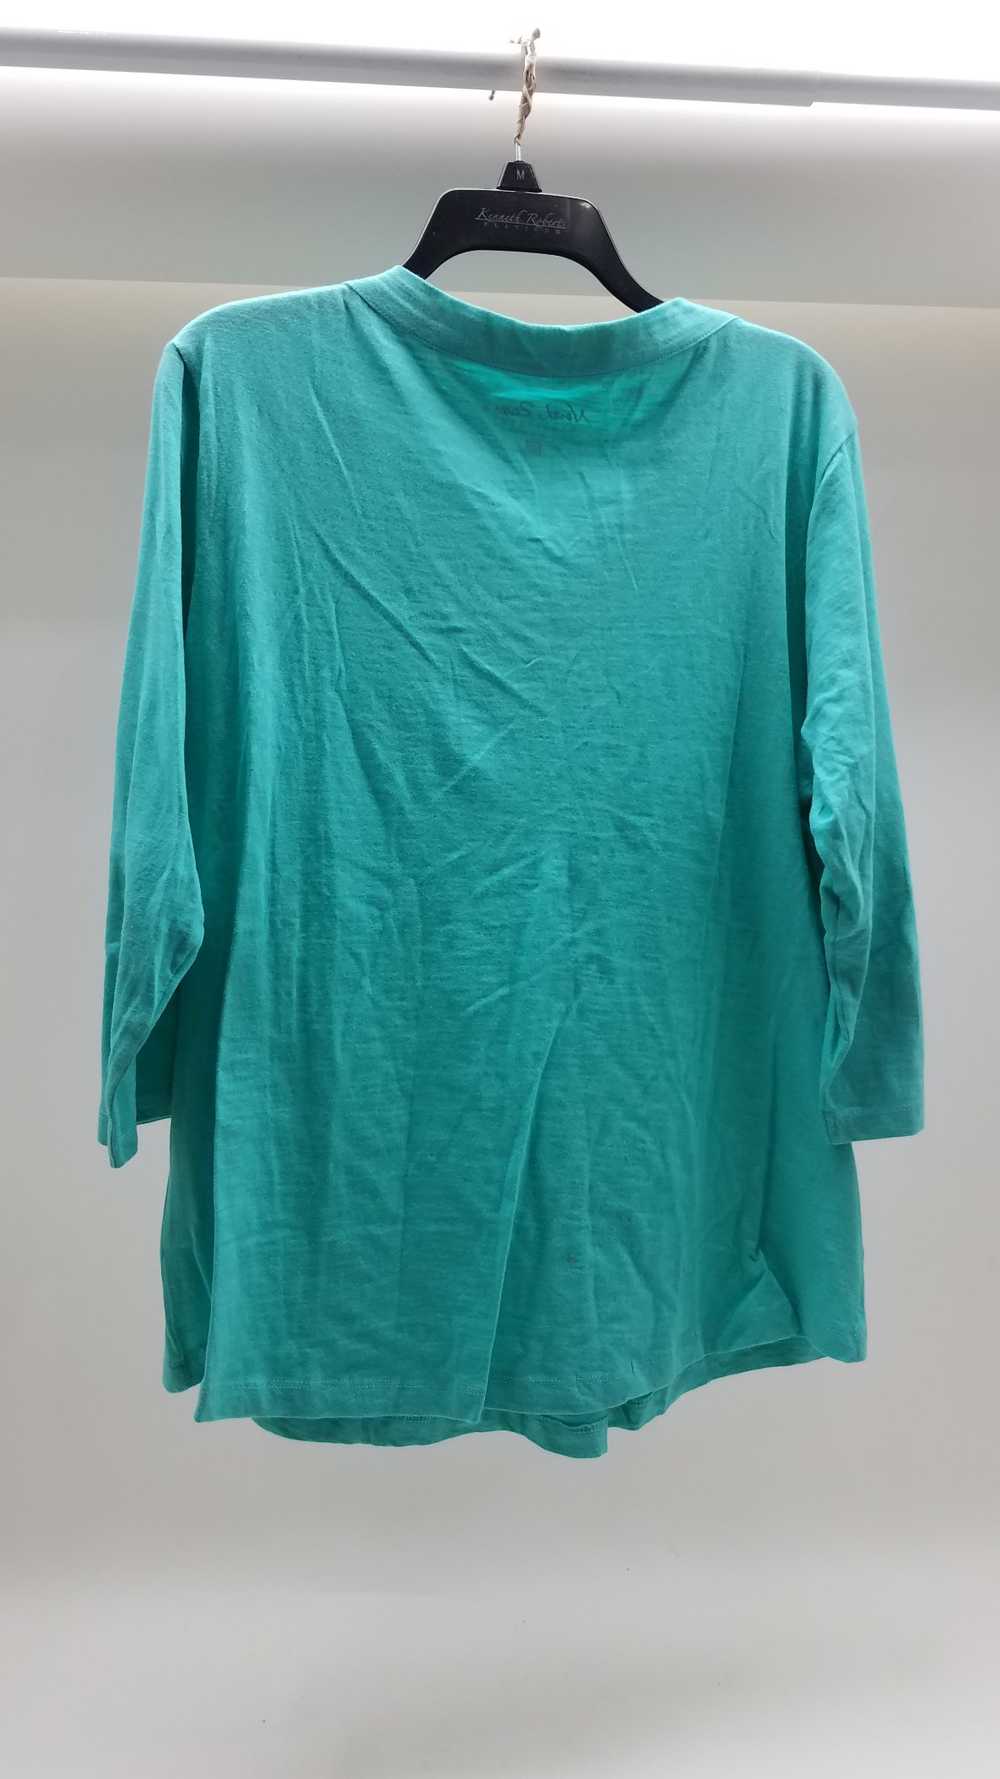 Women's NORTH RIVER Turquoise Blue Top XL - image 2